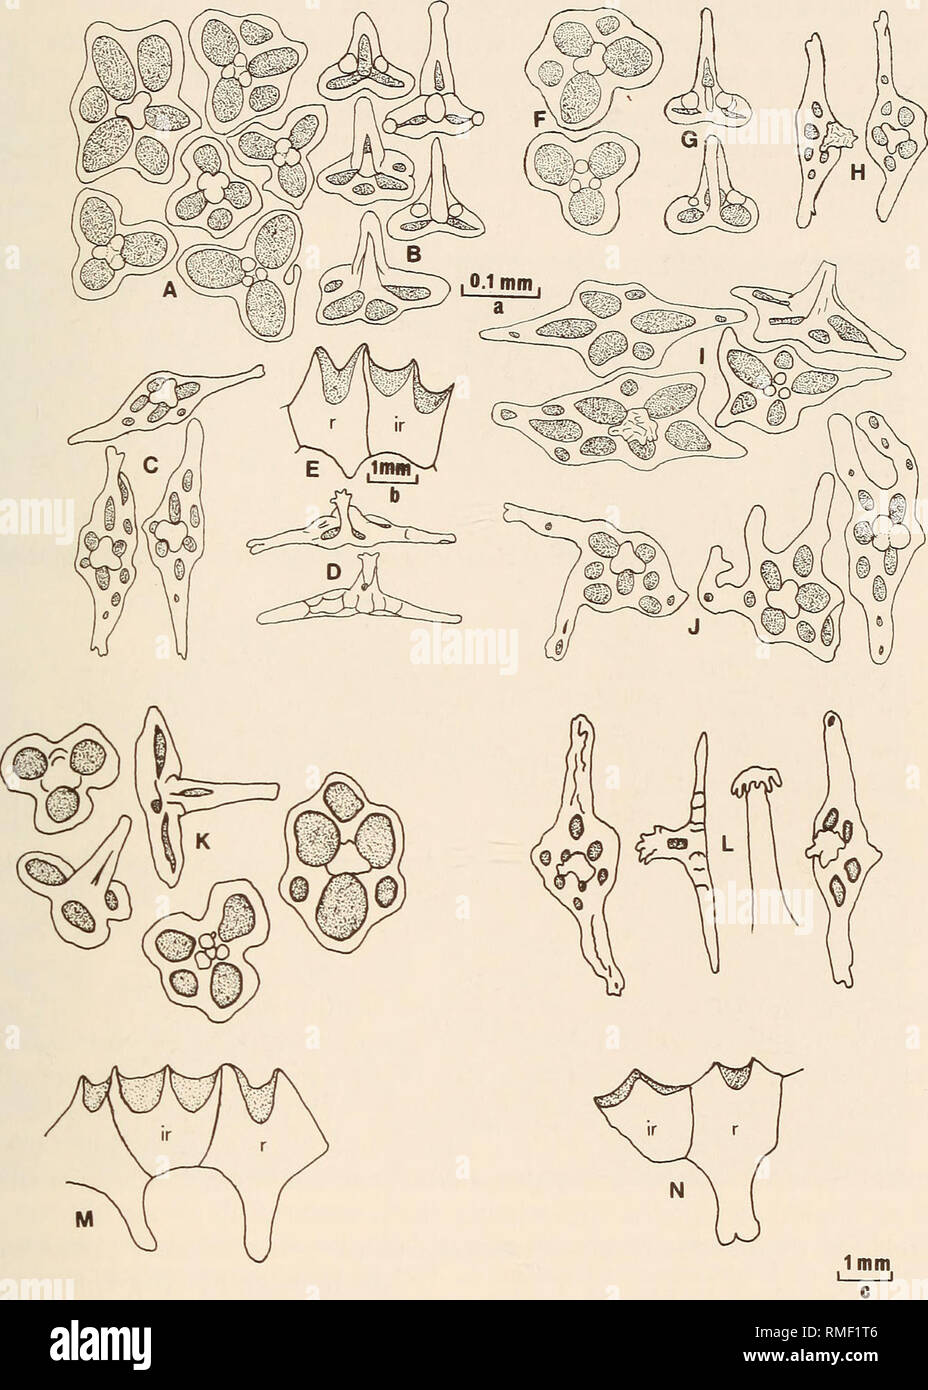 . Annals of the South African Museum = Annale van die Suid-Afrikaanse Museum. Natural history. DEEP-SEA HOLOTHUROIDS OFF THE CAPE PENINSULA, SOUTH AFRICA 401. Fig. 13. Molpadia millardae sp. nov. Spicules. A. Tables from body wall of paratype SAM-A27711. B. Same from side. C. Tables from tail of paratype SAM-A27711. D. Same from side. E. Part of calcareous ring of holotype, SAM- A22163. F. Tables from body wall of holotype. G. Same from side. H. Tables from tail of holotype. I. Tables from anterior body wall of holotype. J. Tables from base of tail of holotype. K. Spicules from body wall of pa Stock Photo